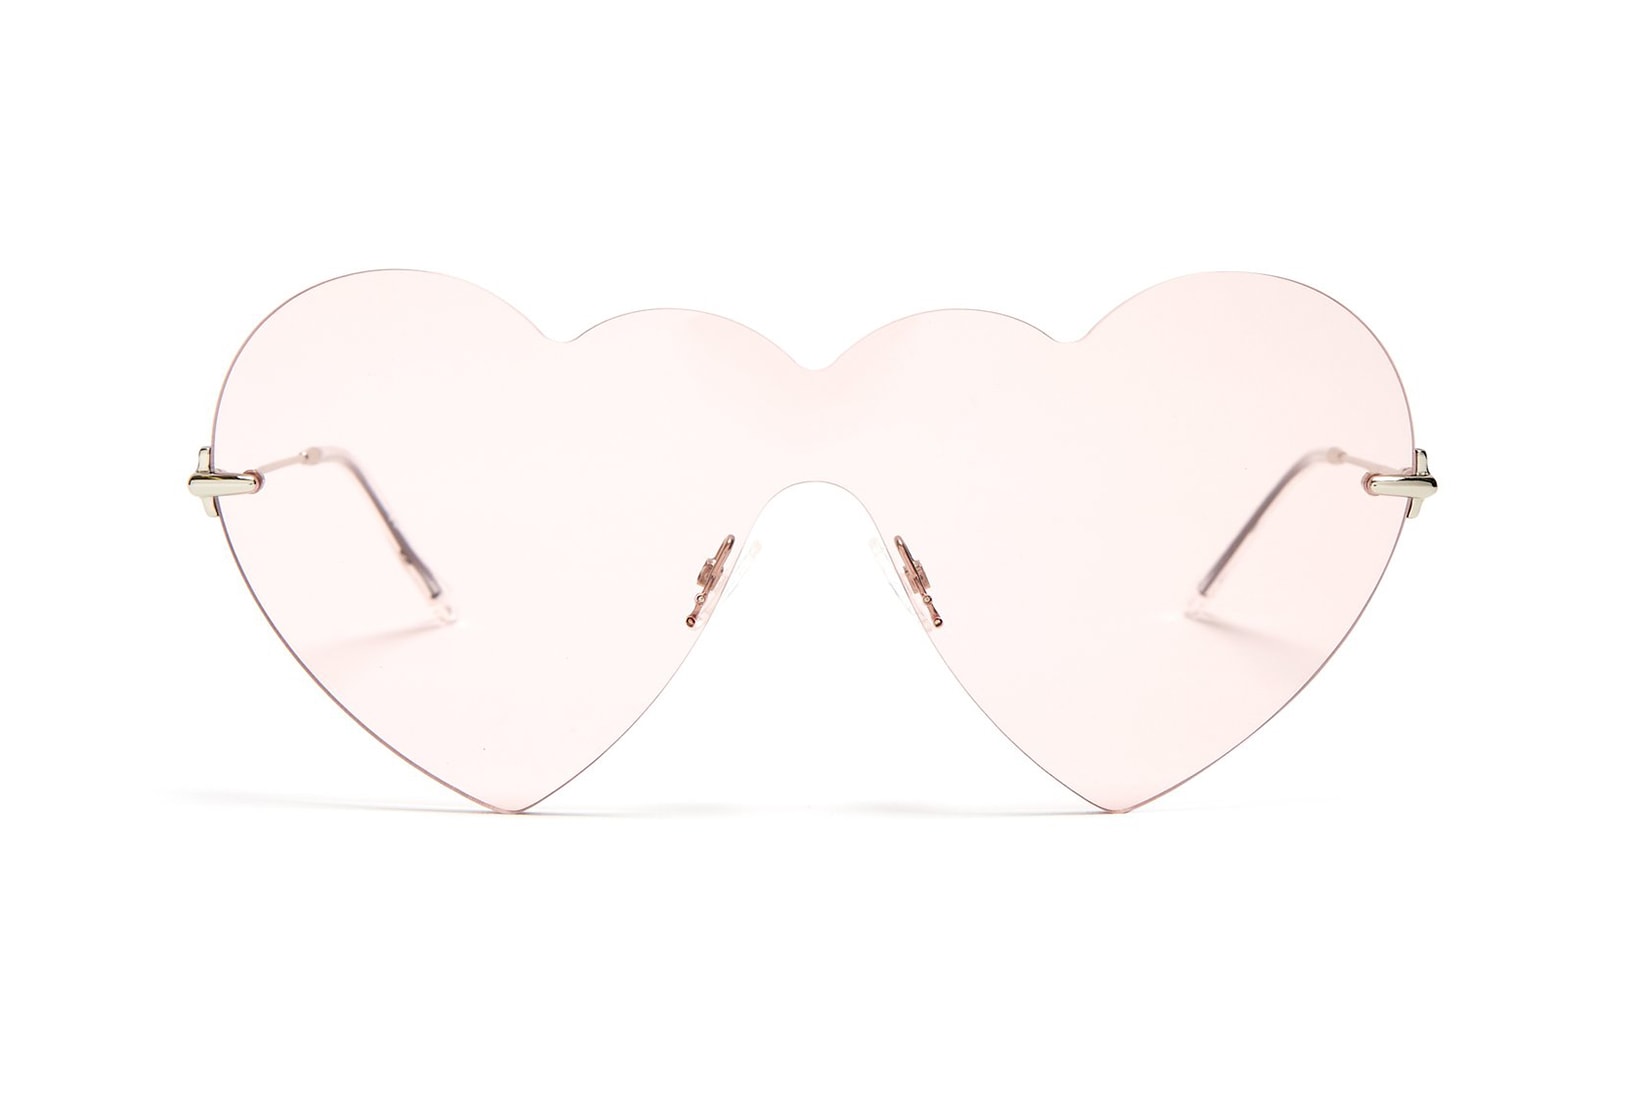 Christopher Kane Heart-Shaped Sunglasses Shades Heart Glasses Pastel Pink Red Blue Rimless where to buy matchesfashion.com